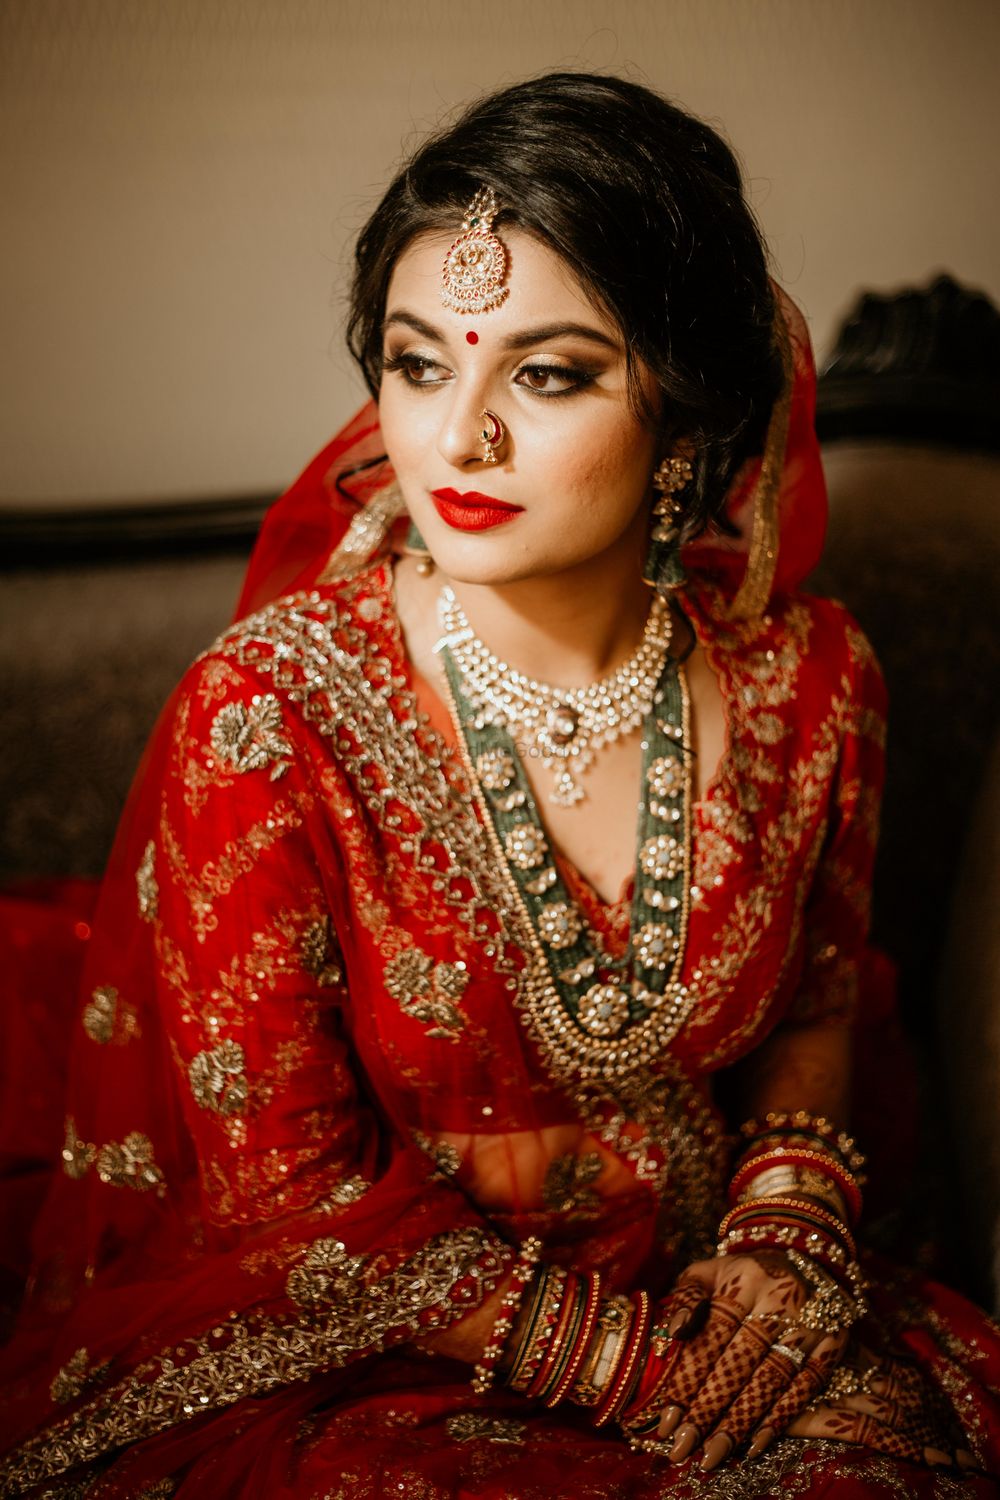 Photo of Bridal makeup with red lips and green jewellery